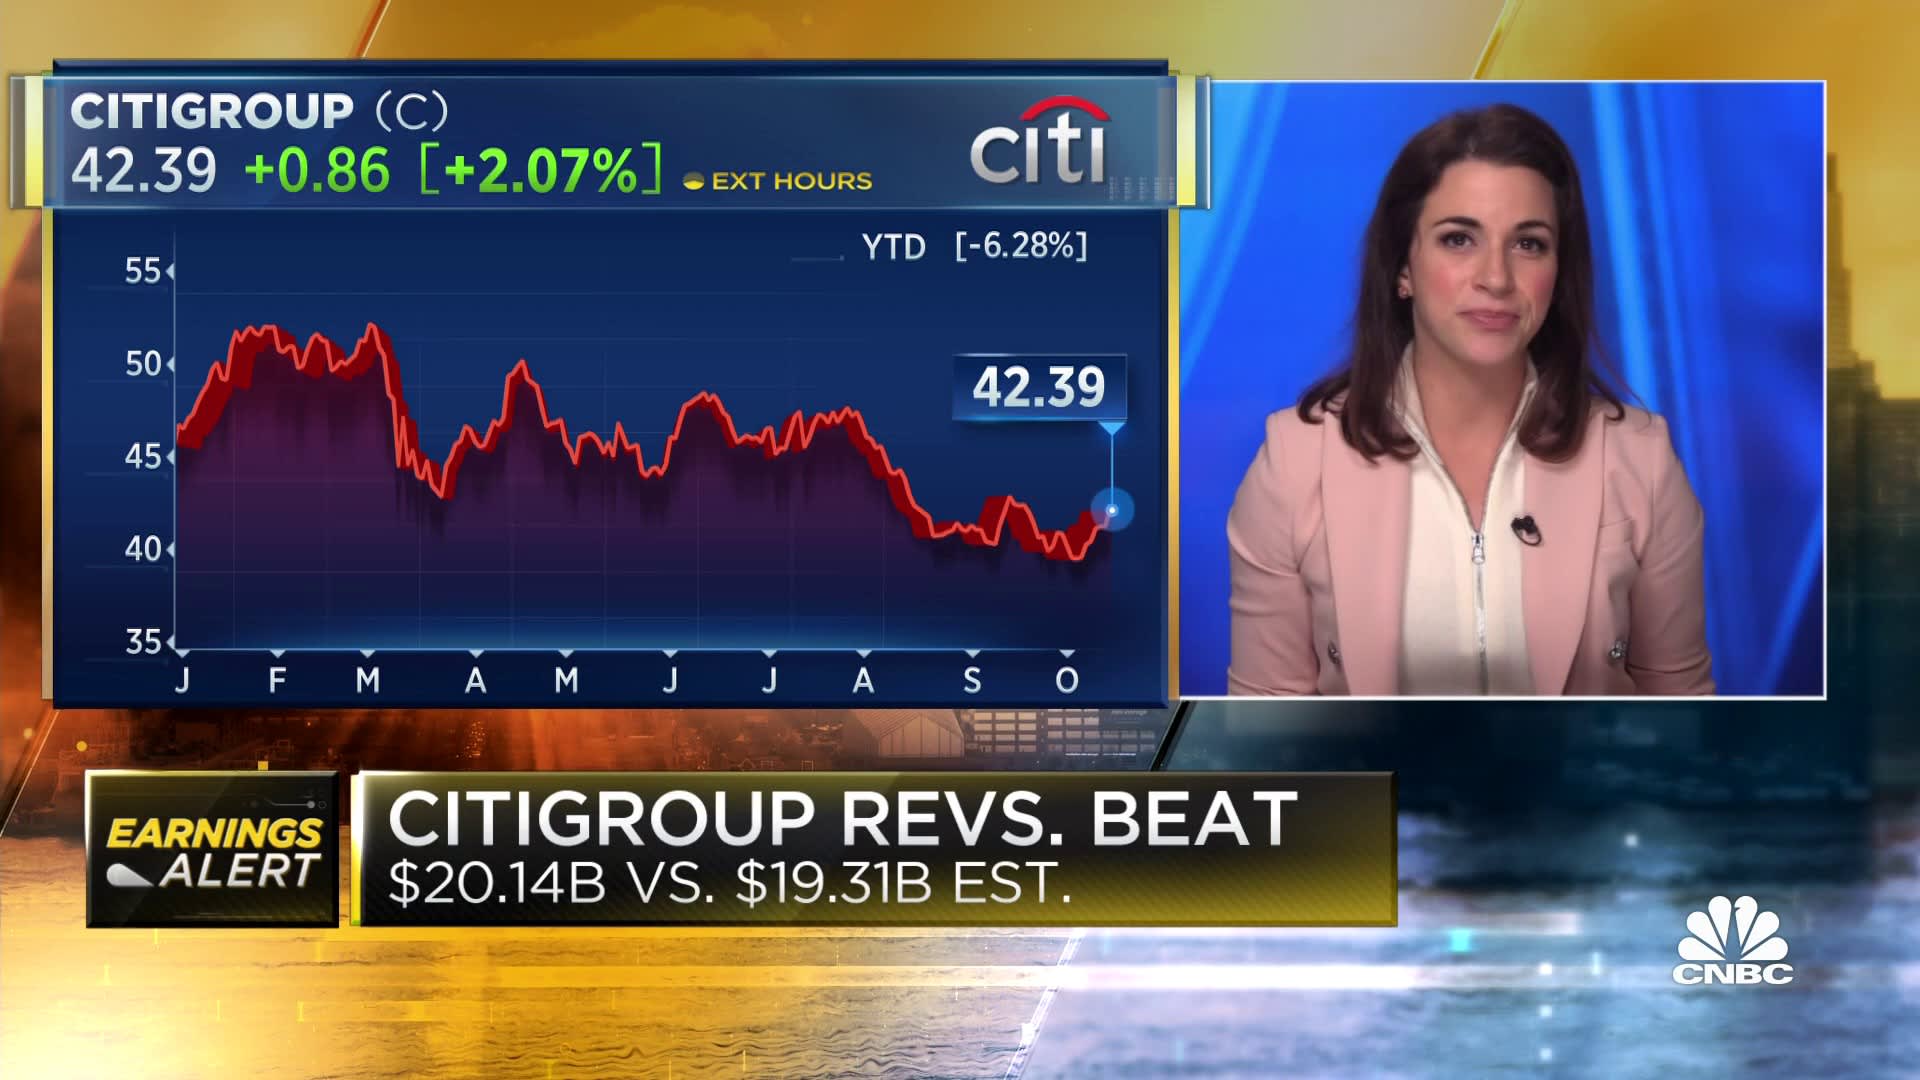 Citigroup stock jumps on better-than-expected revenue for the third quarter